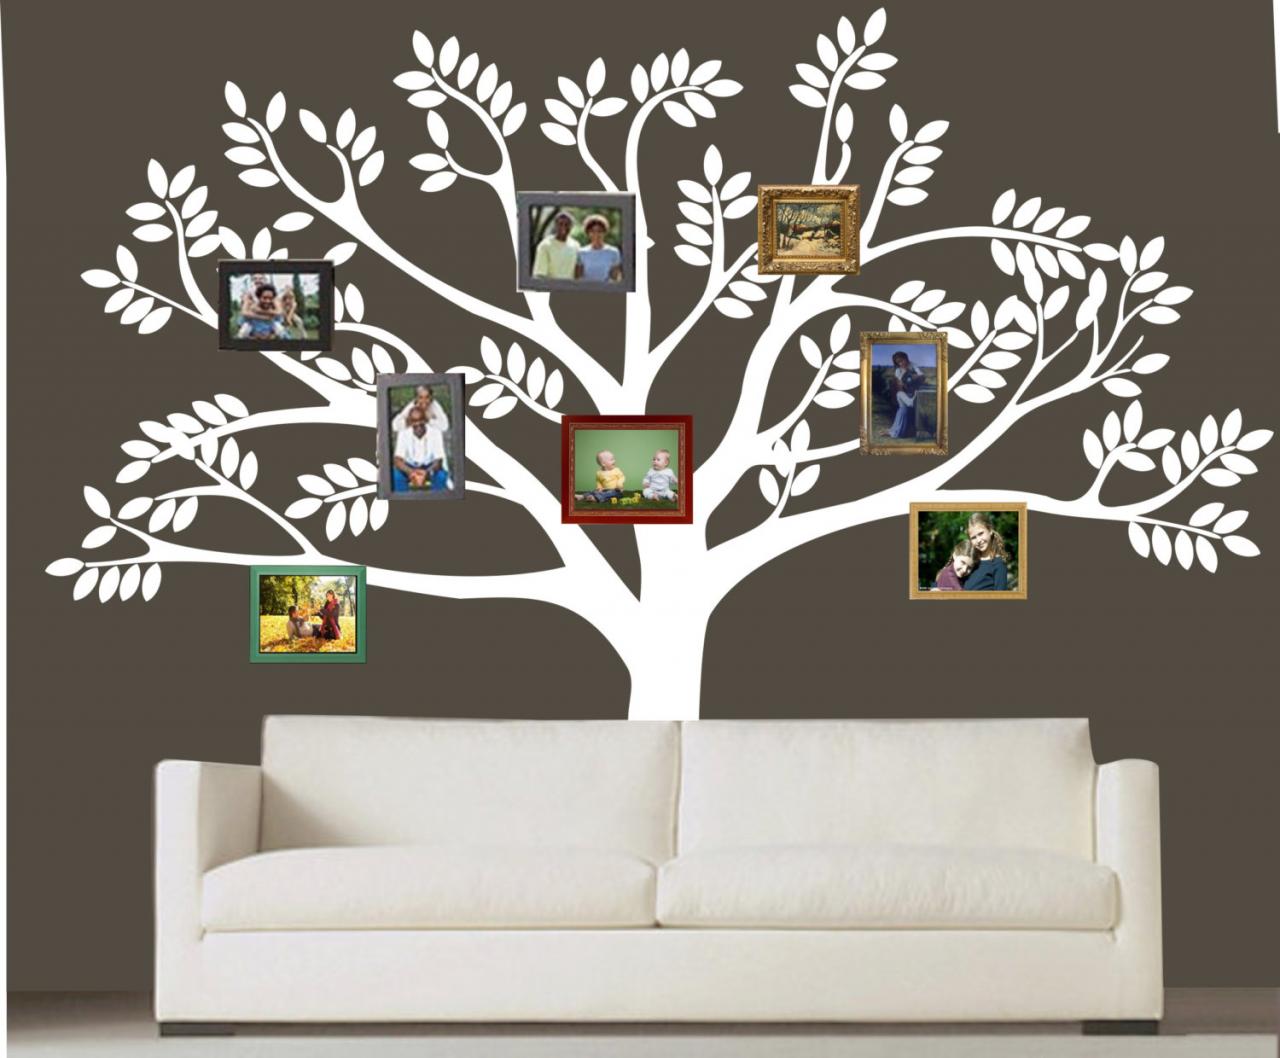 Custom Family Tree Decal Vinyl Wall Decal Photo White Tree Decals Leaf Leaves Home Baby Room Wall Sticker Stickers Mural Removable Kids R718